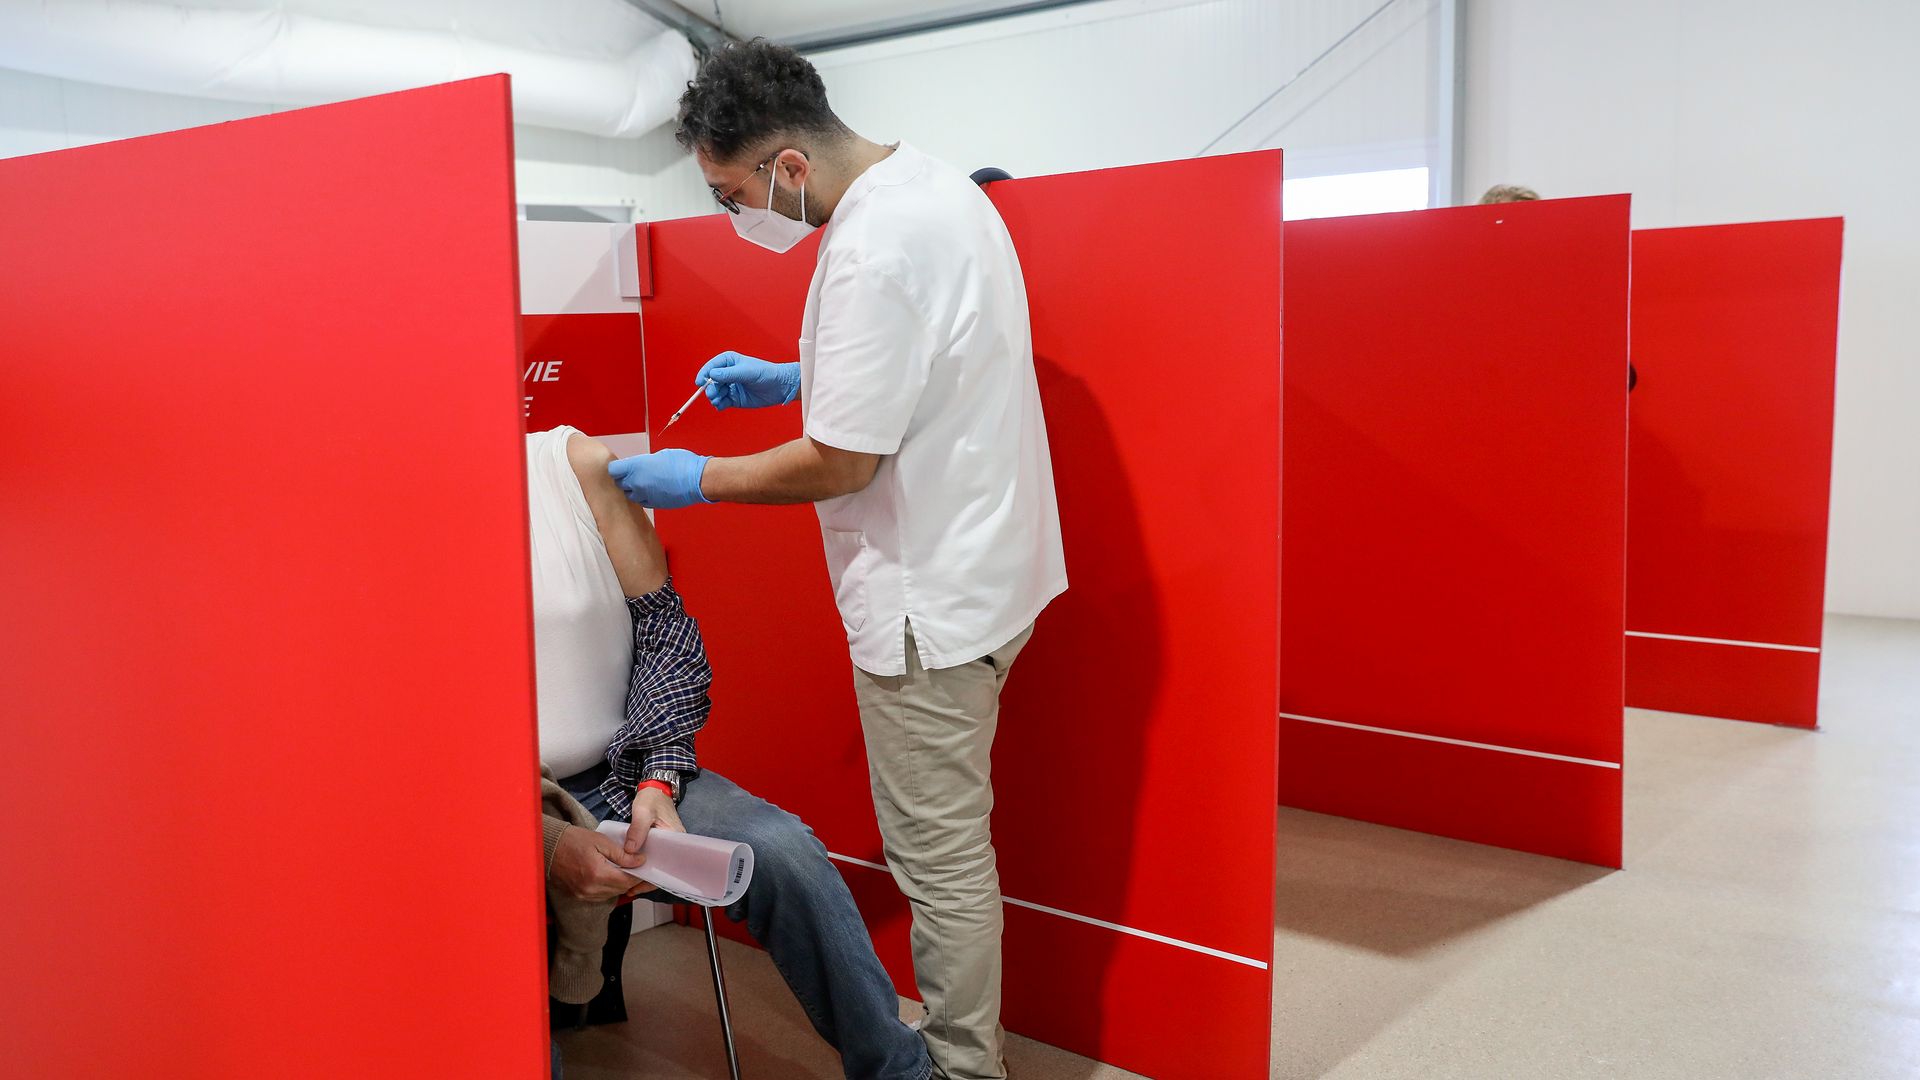 A health worker administers the Covid-19 vaccine at a Covid-19 vaccination center outside Rome's Termini railway station in Rome, Italy, 